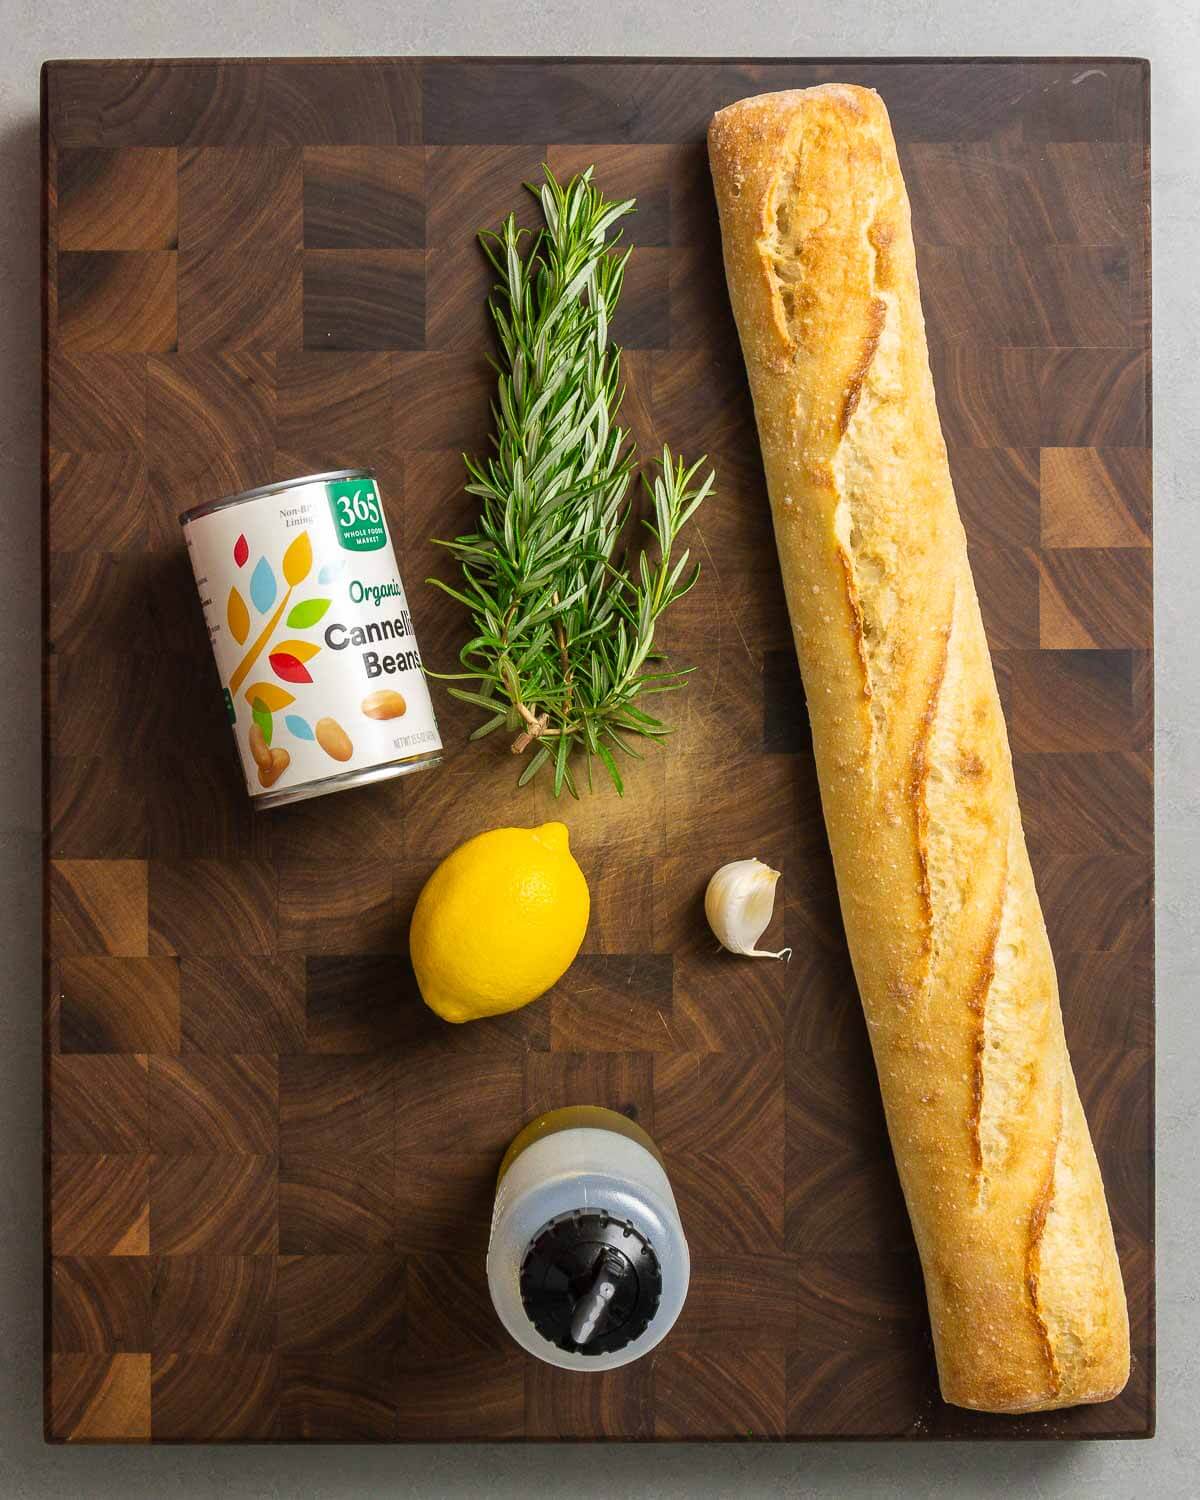 Ingredients shown: cannelini beans, rosemary, baguette, lemon, garlic, and extra virgin olive oil.